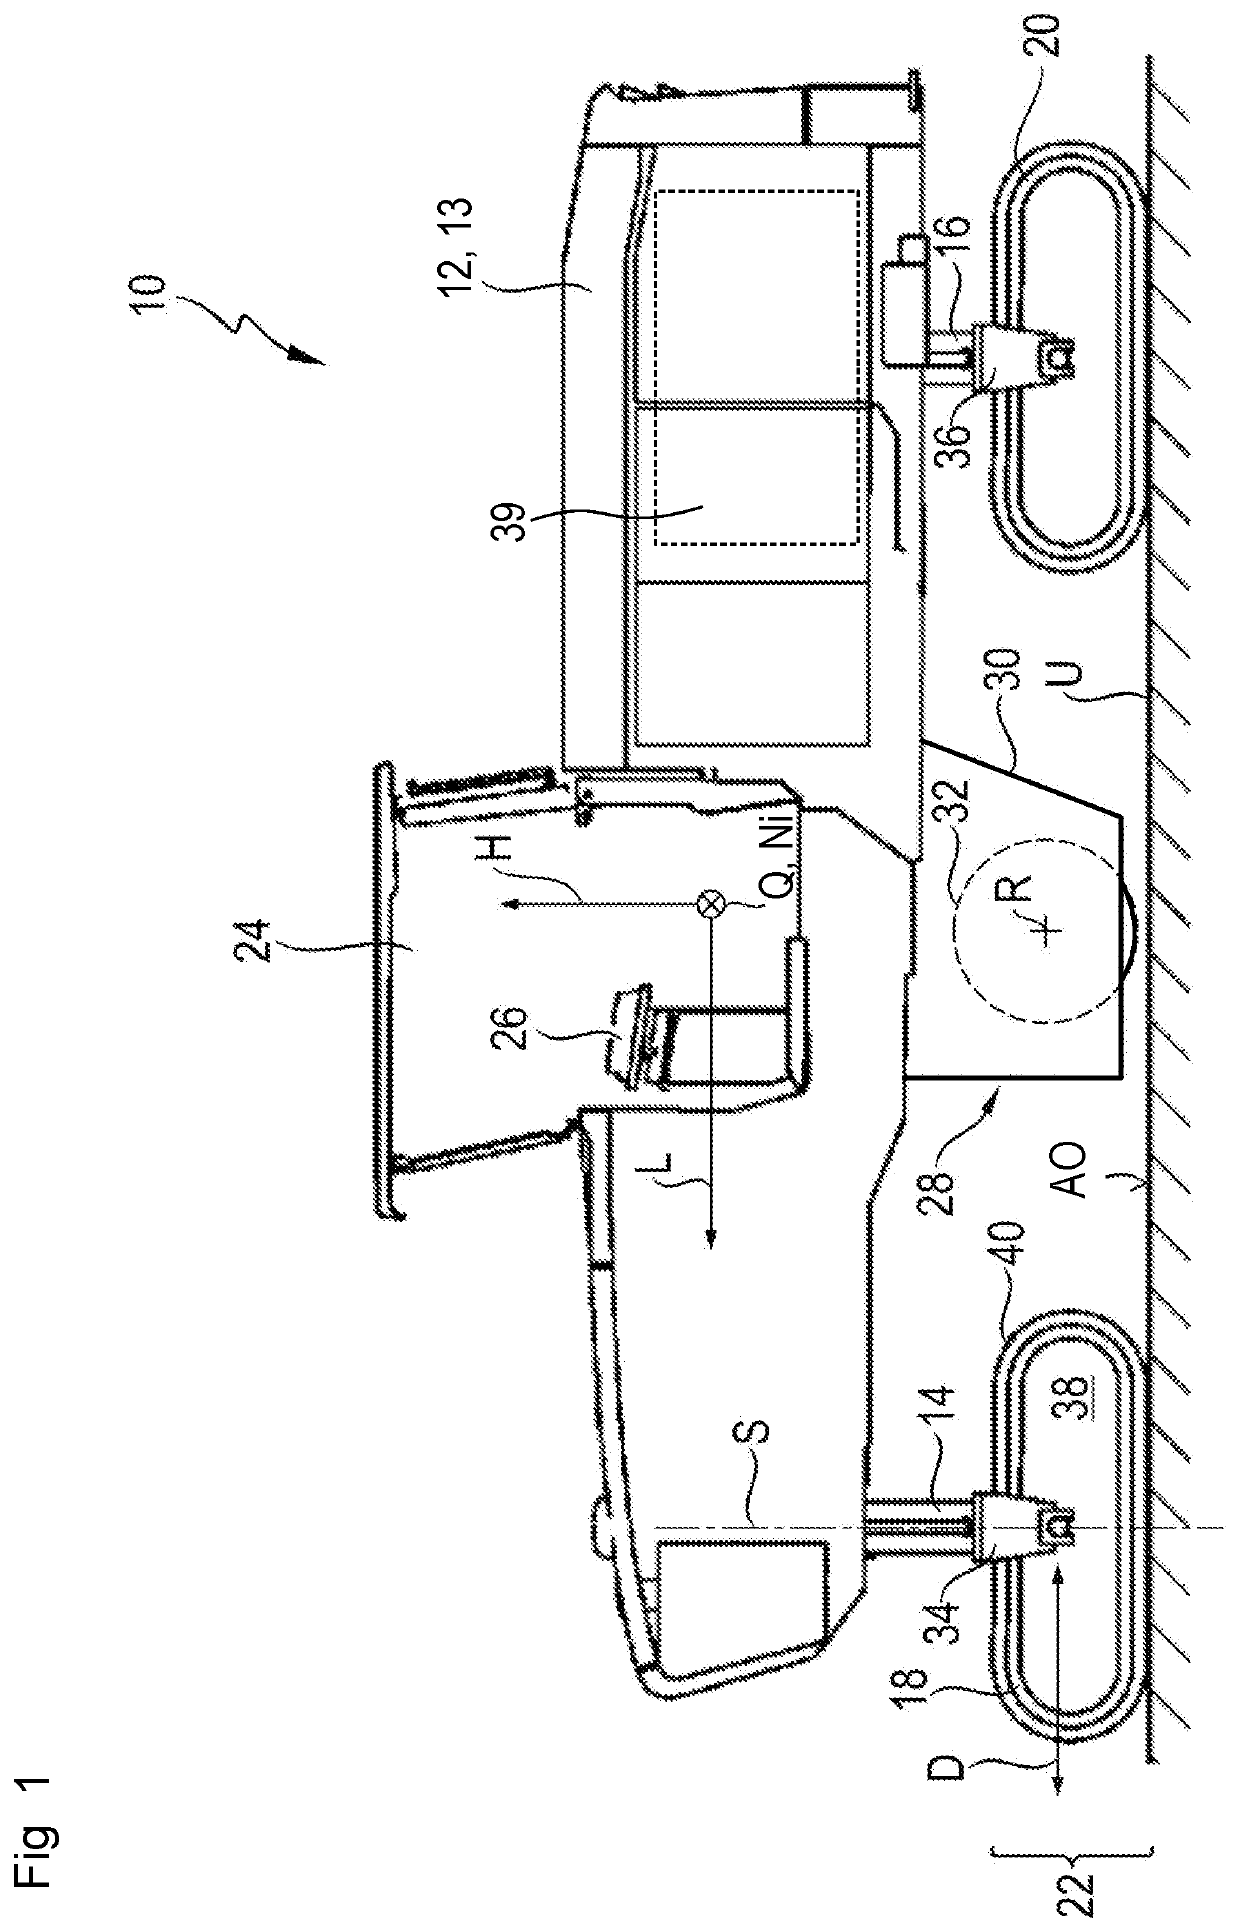 Earth working machine having a rotatable working apparatus axially positionally retainable with high tightening torque by means of a central bolt arrangement, and method for establishing and releasing such retention